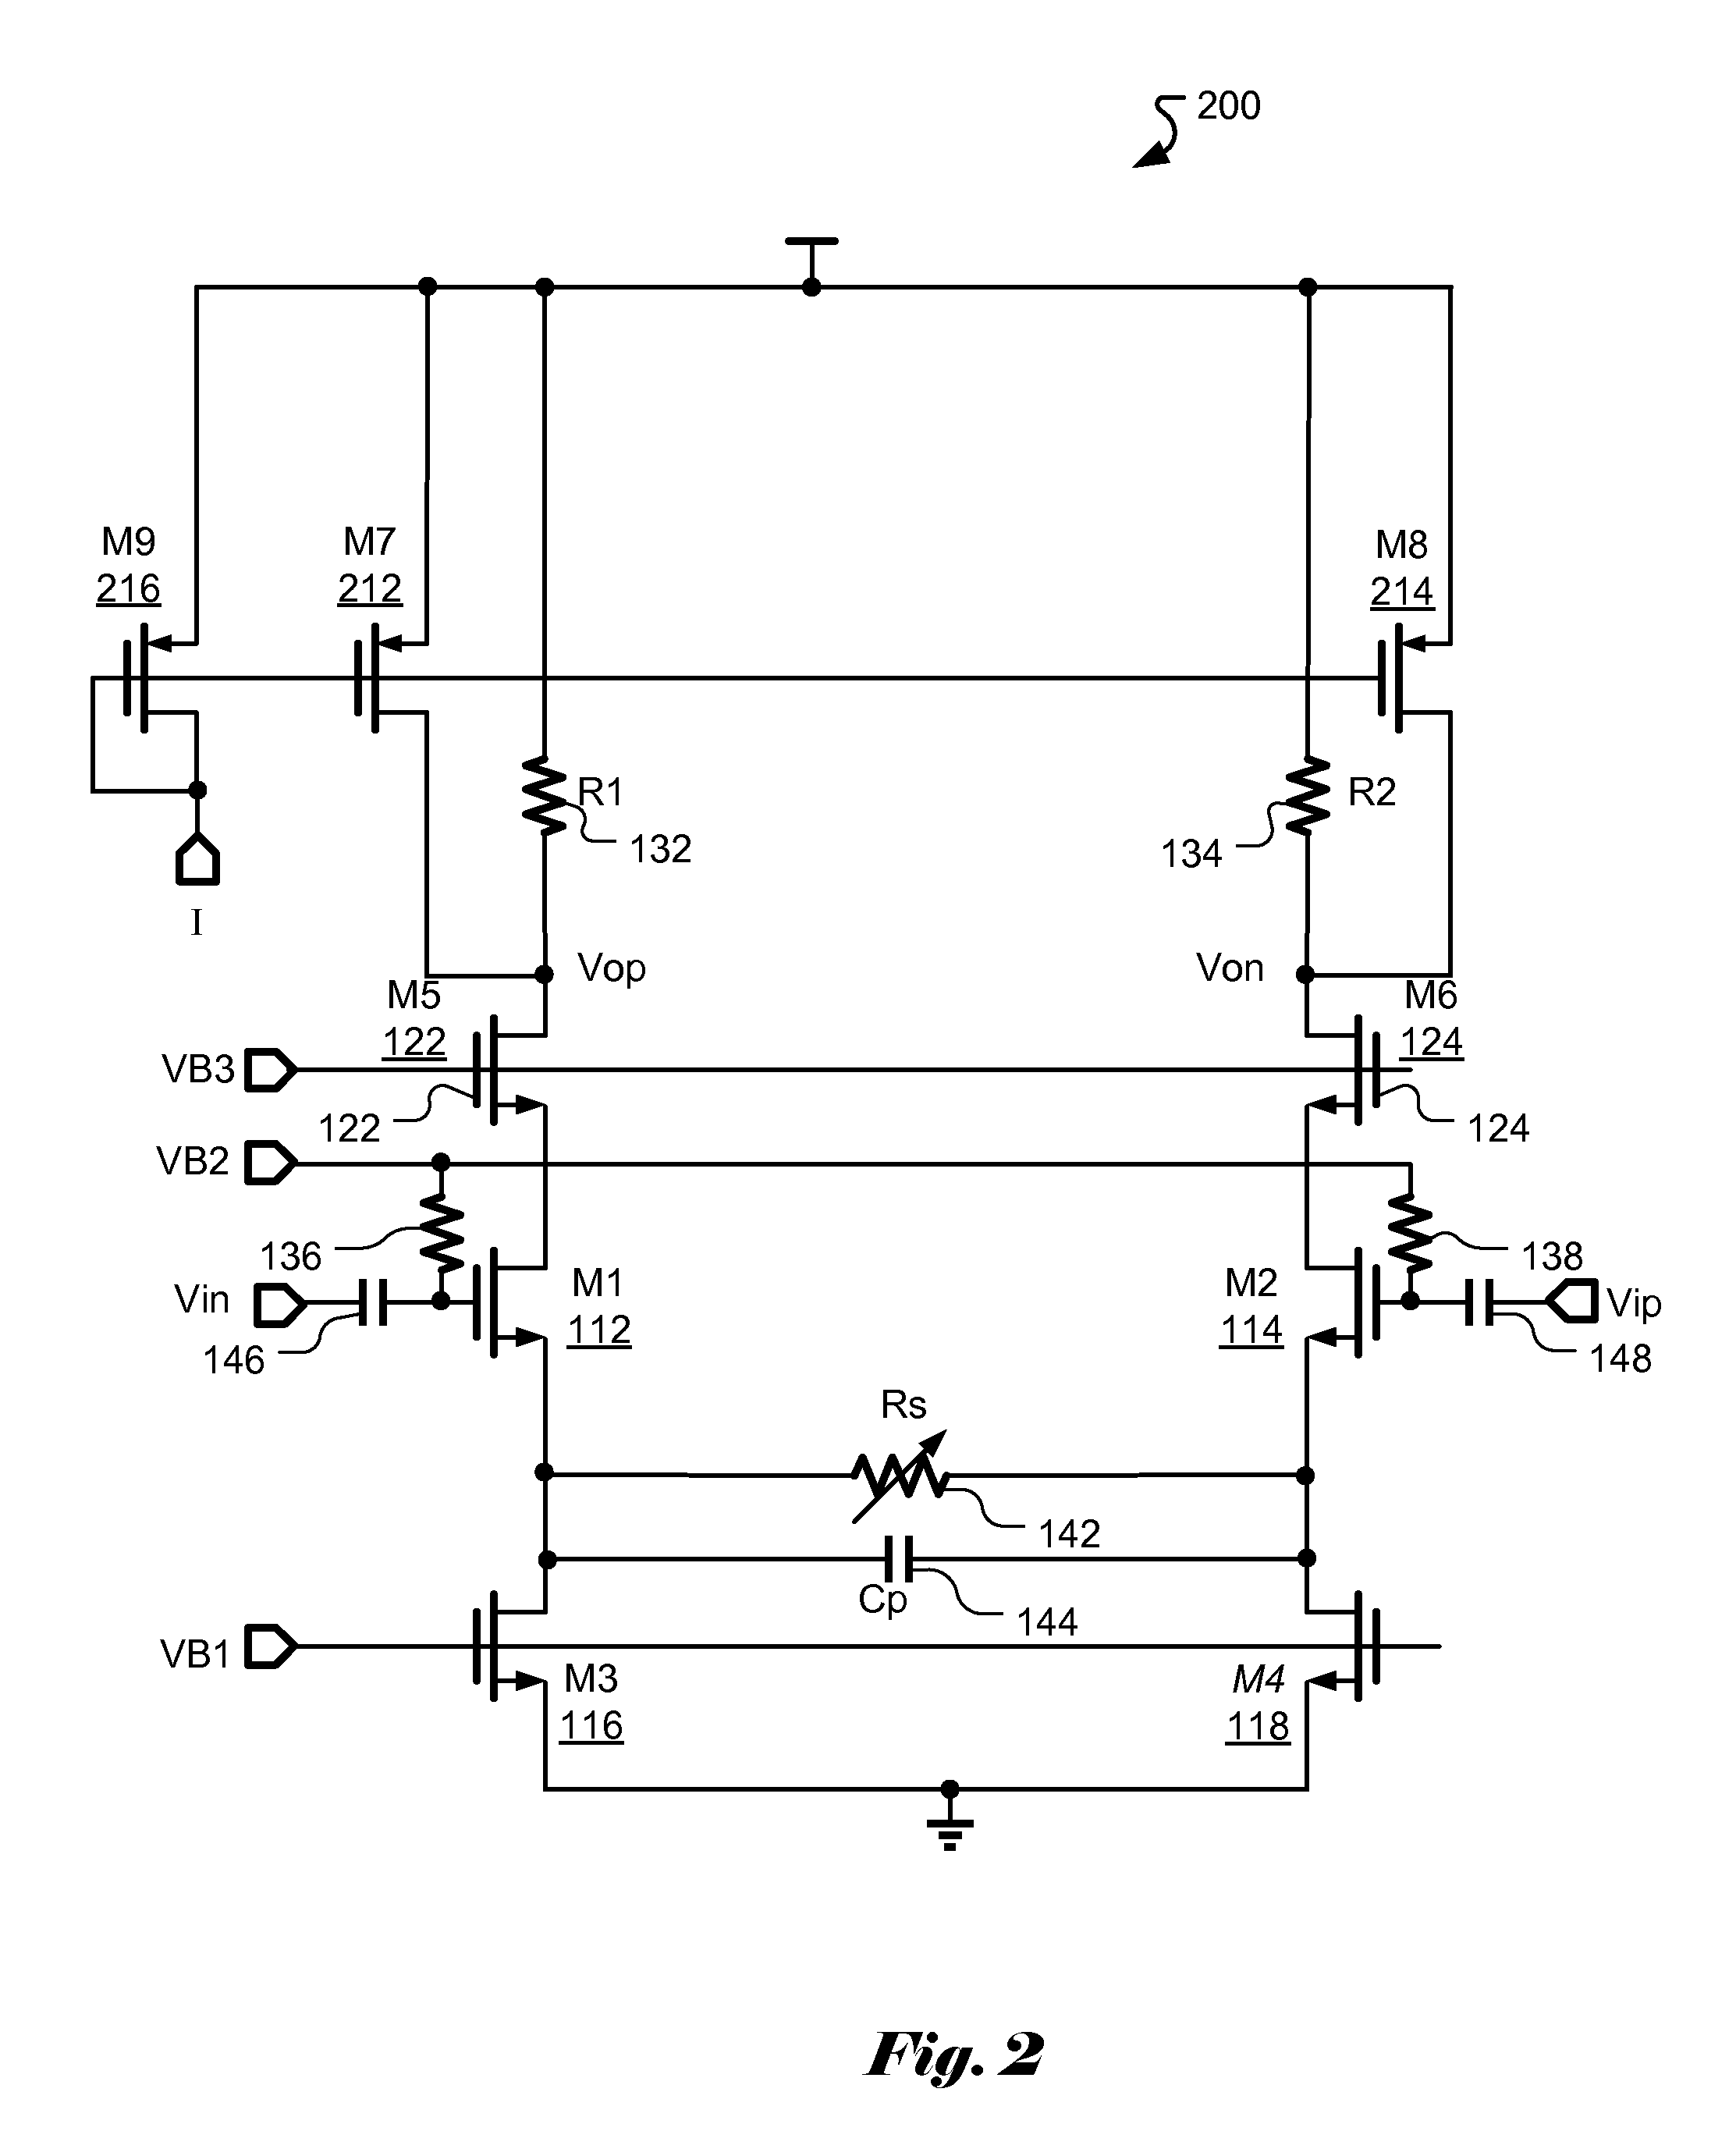 Low noise amplifier with current bleeding branch